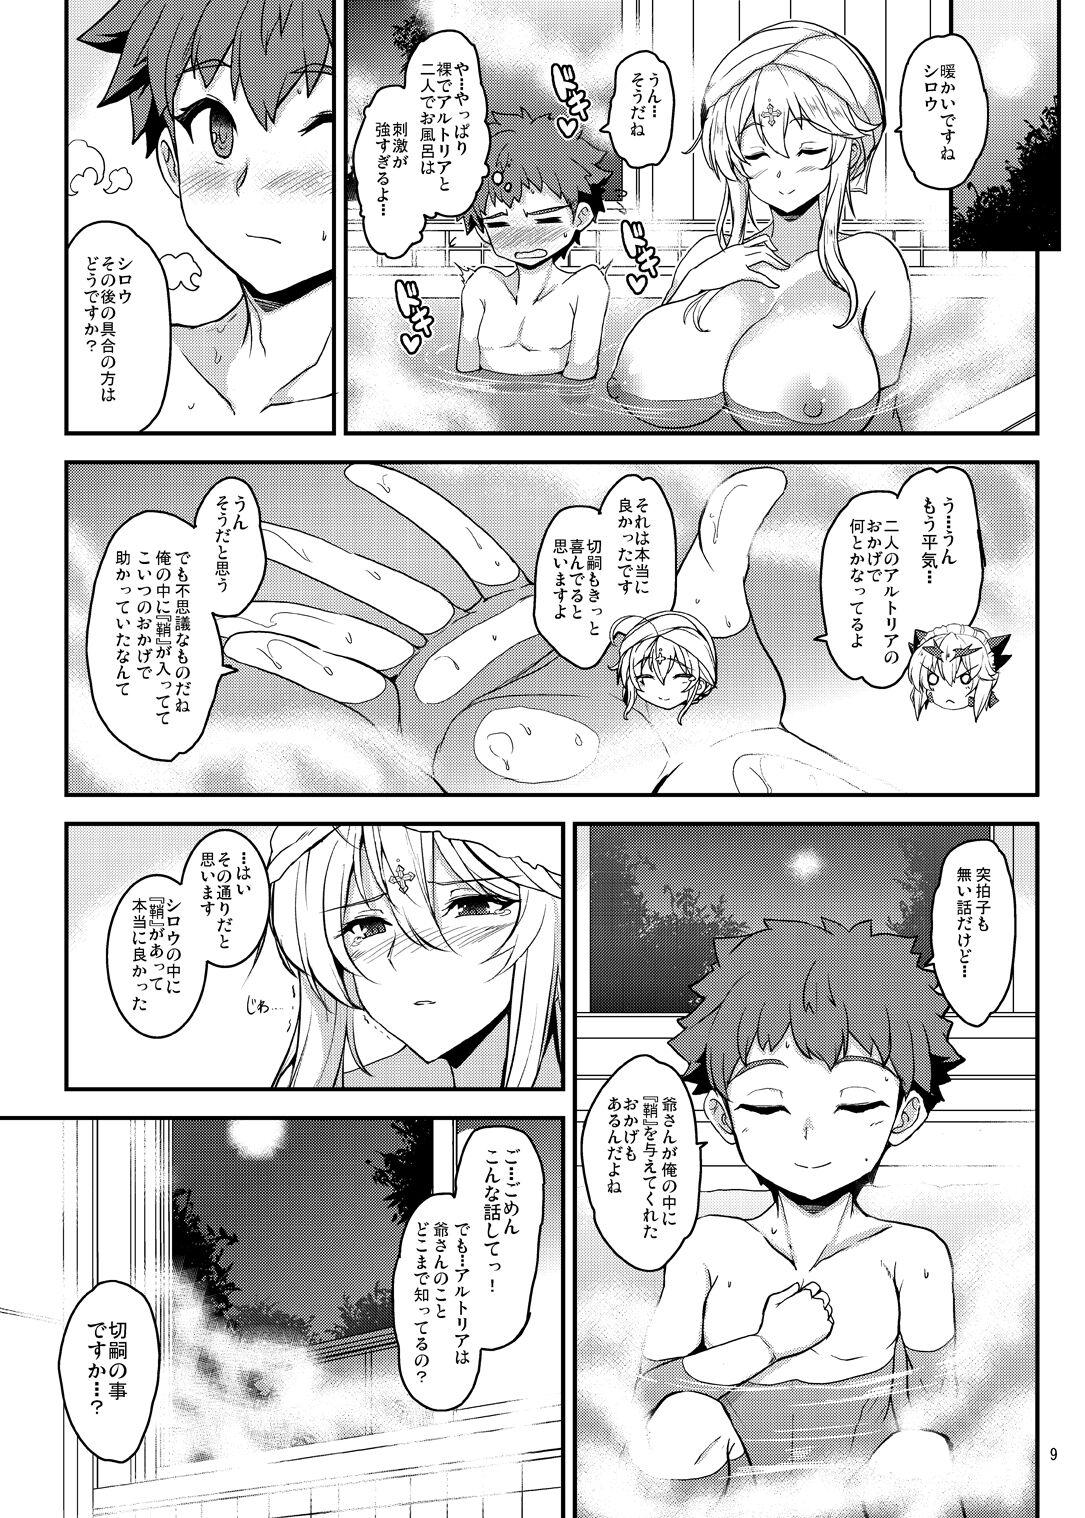 Plump となりの乳王さま六幕 - Fate grand order Pink - Page 9